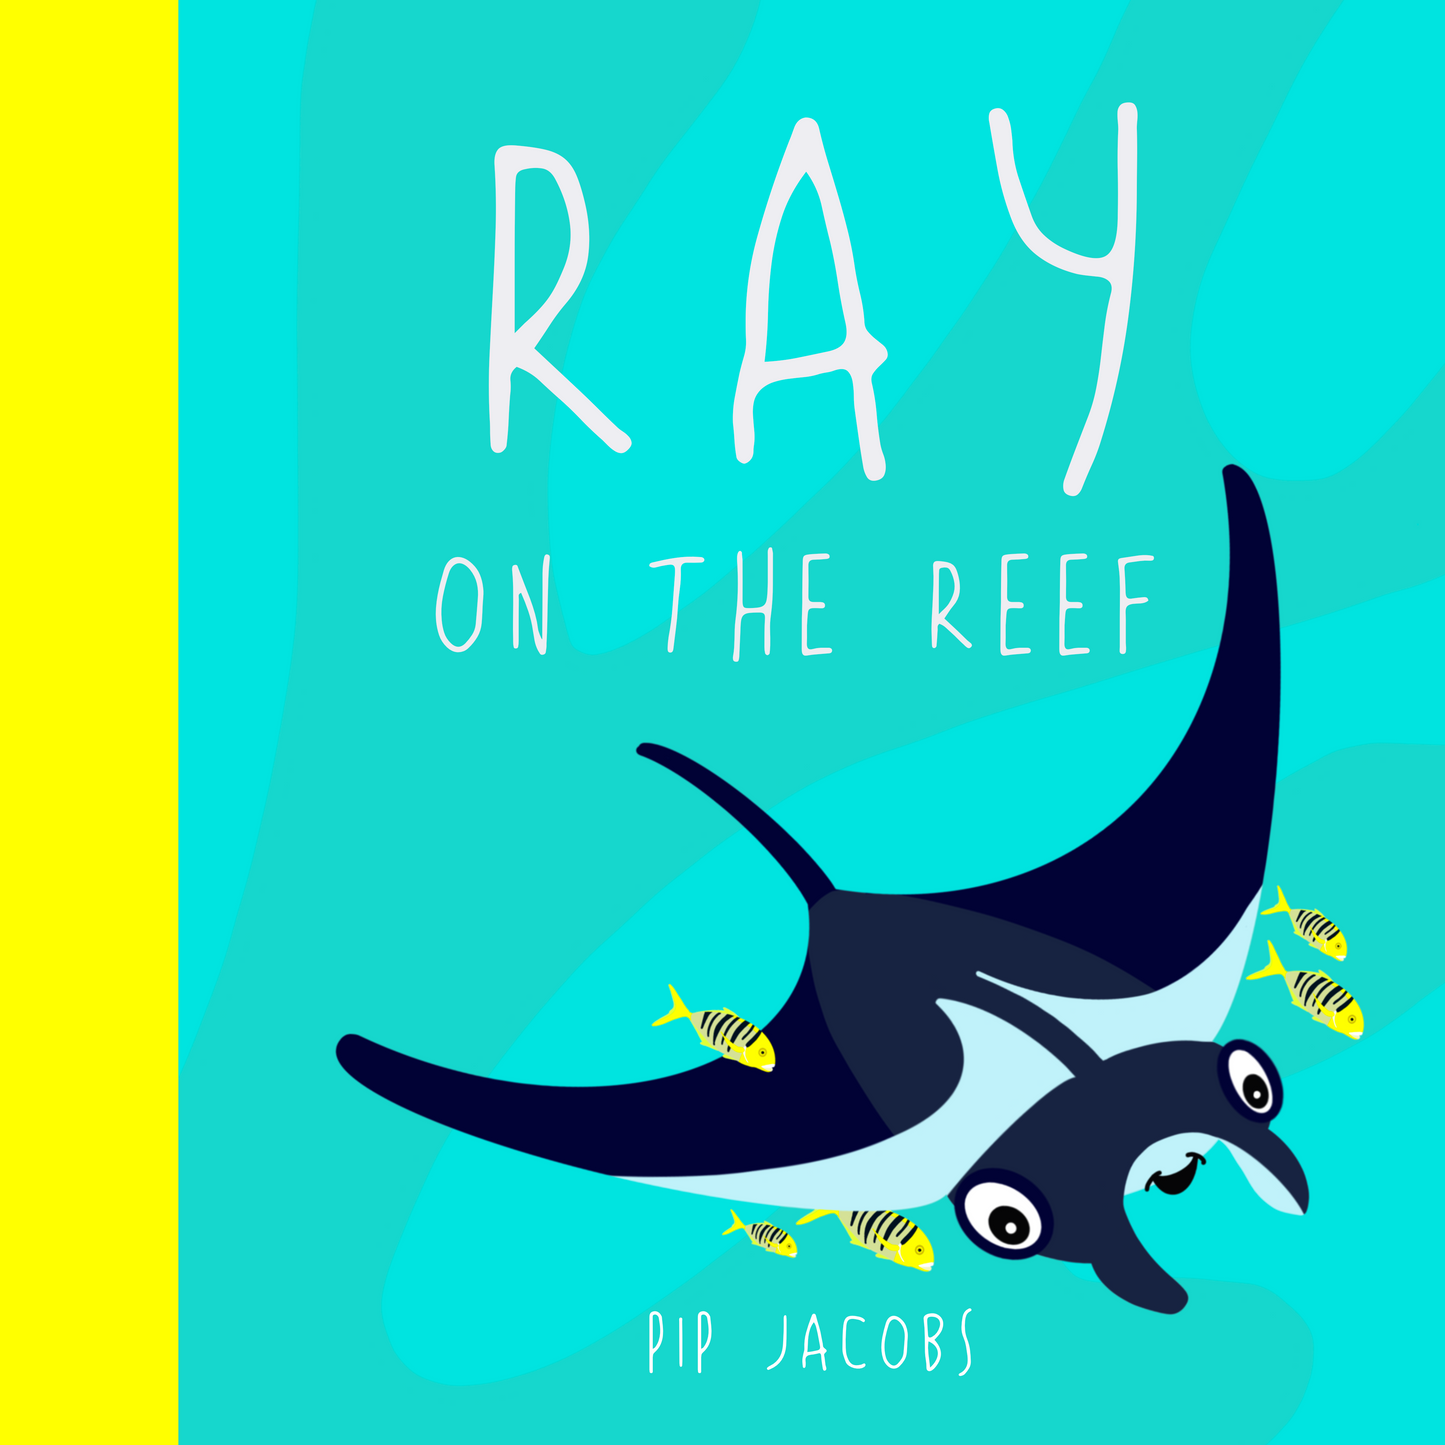 RAY ON THE REEF